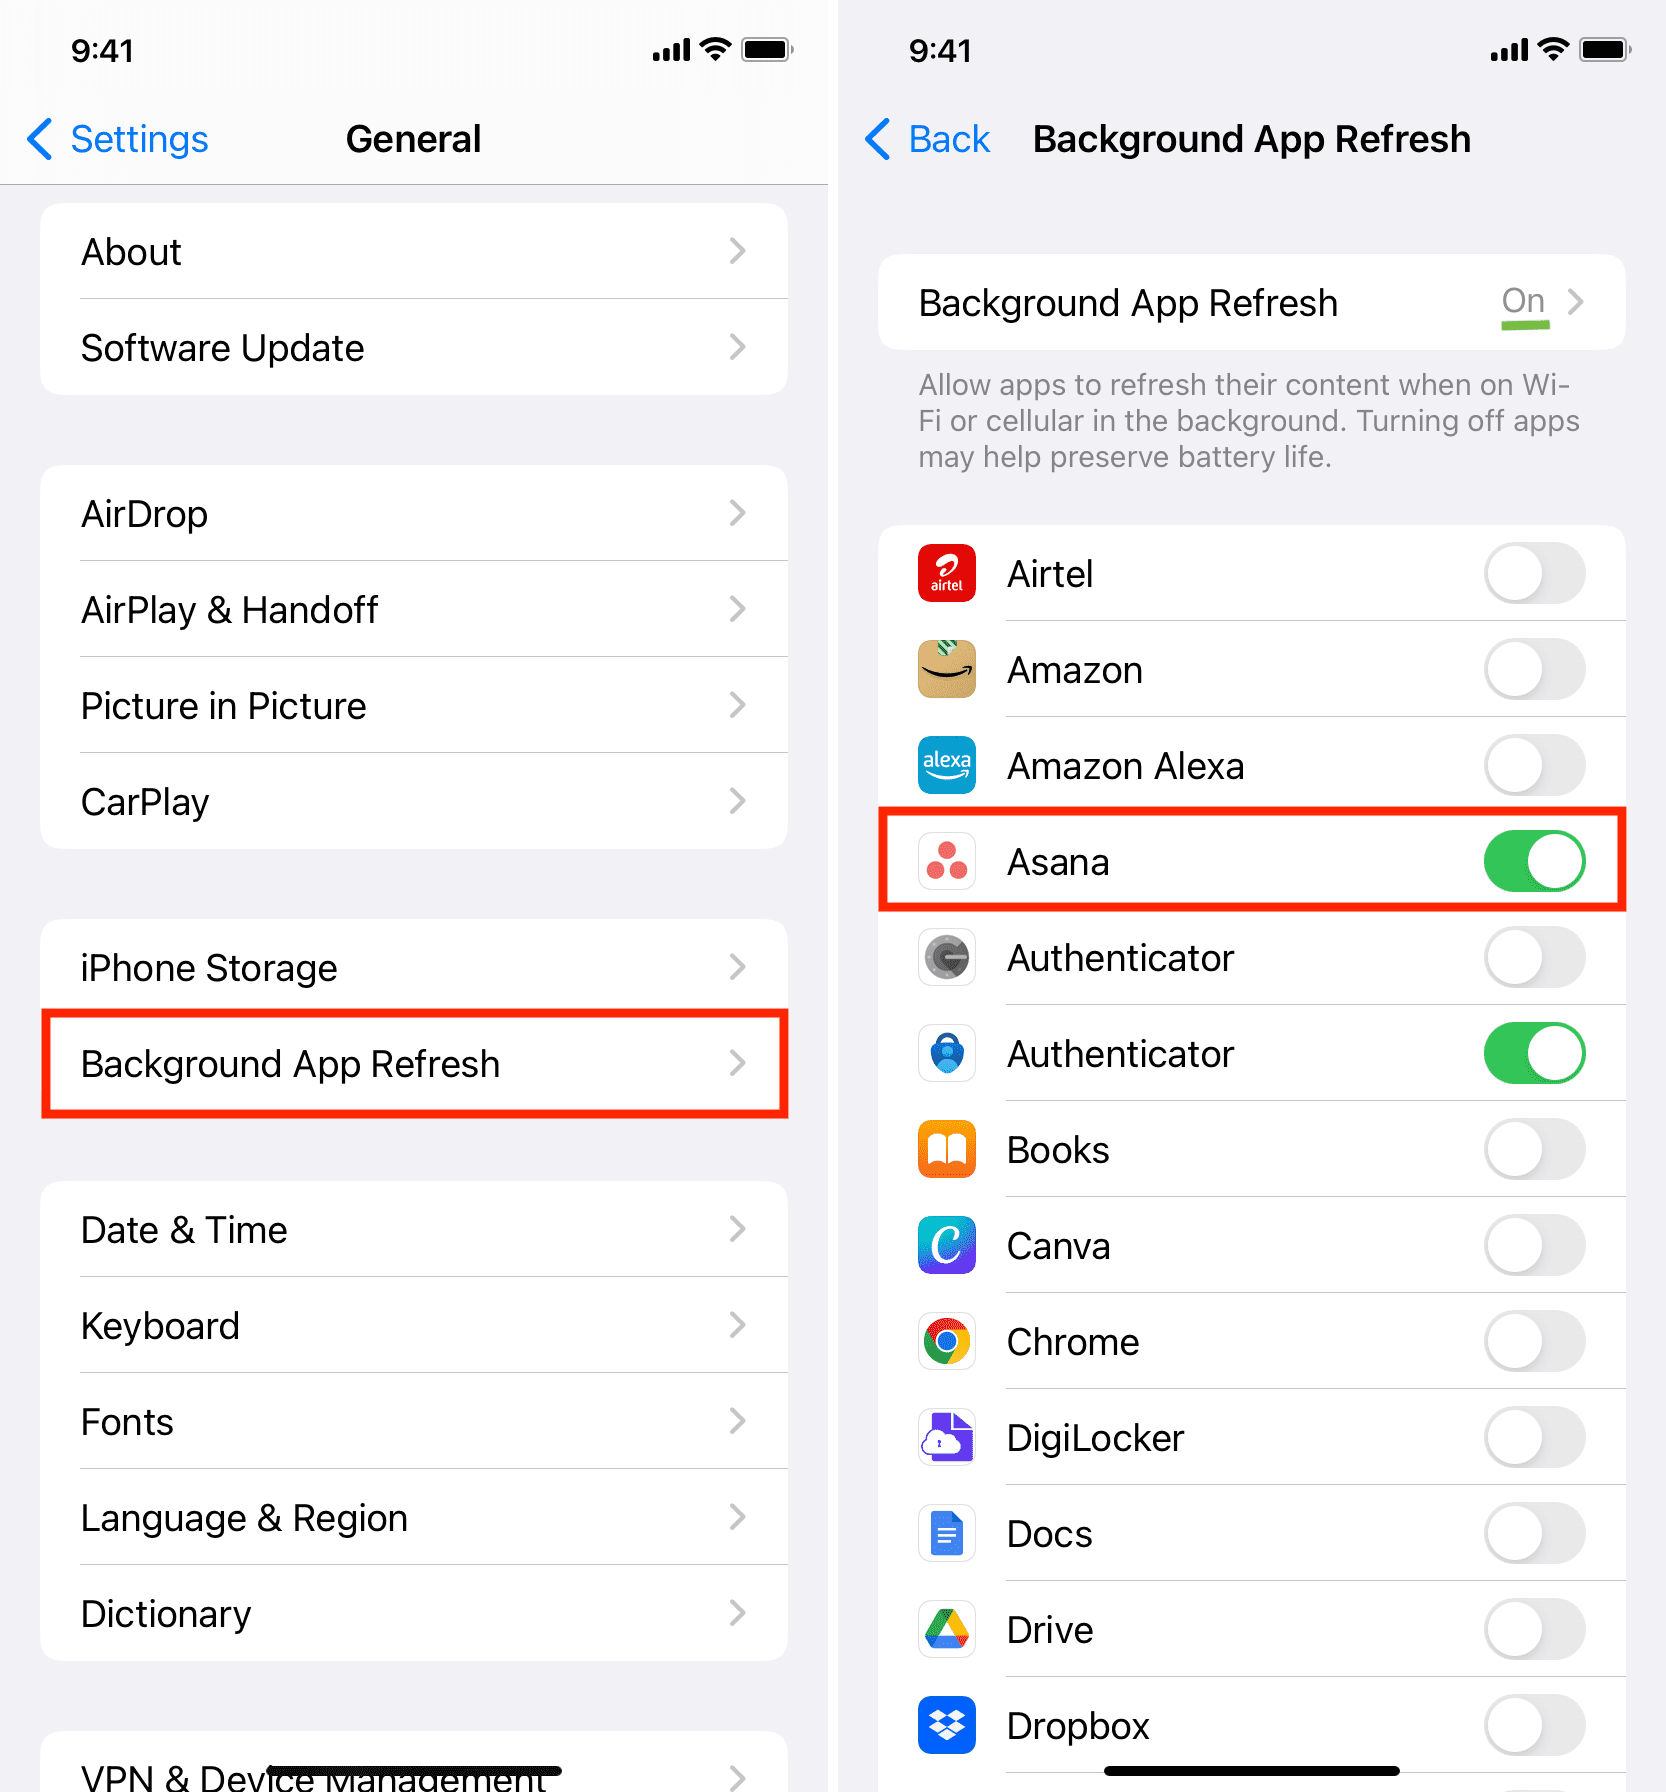 Enable Background App Refresh for selected apps and turn it off for all other apps